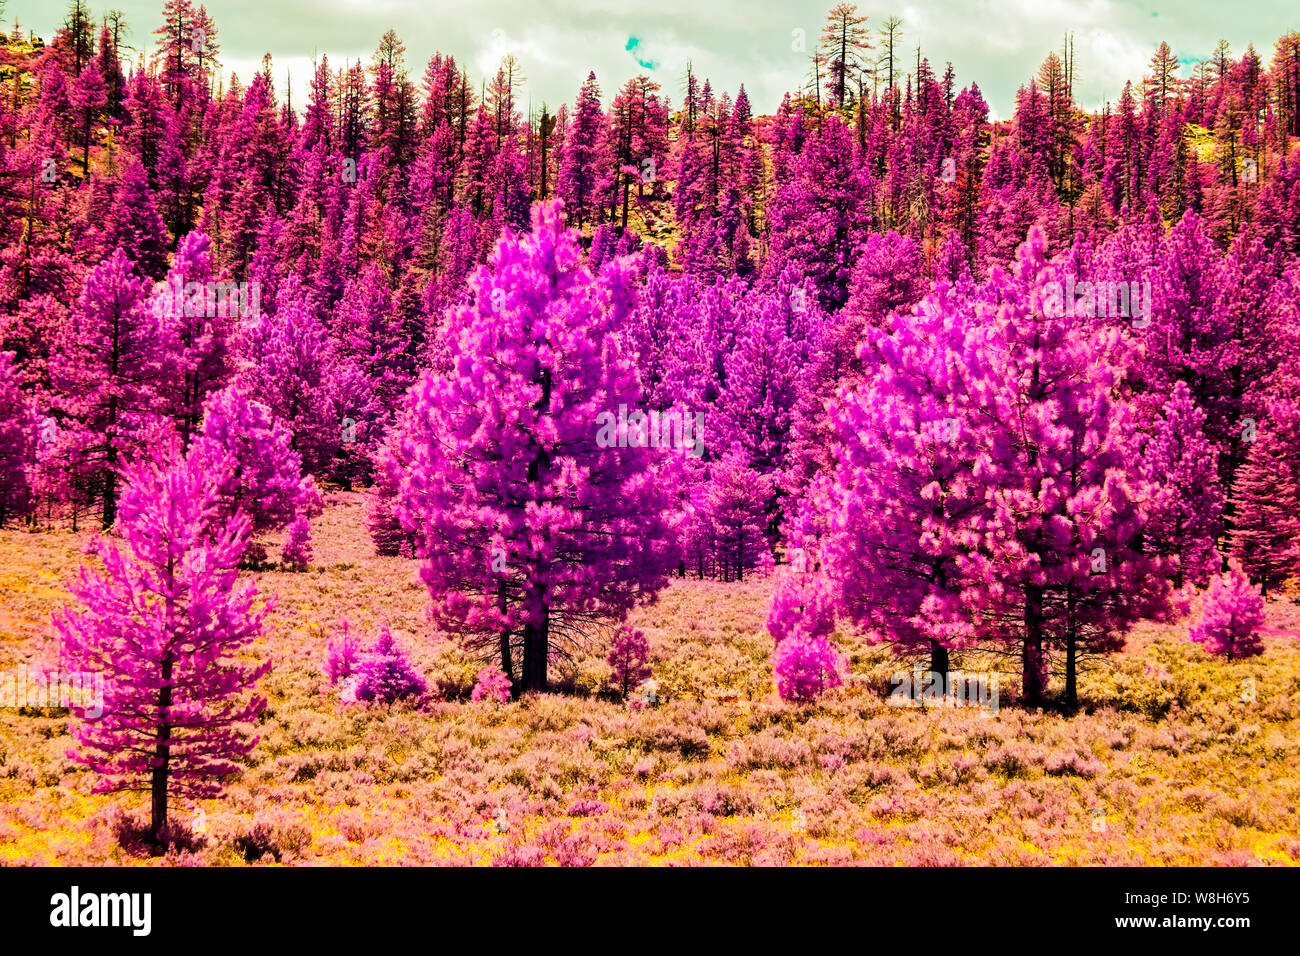 Pink trees and brown grass under white cloudy skies. Infrared image. Stock Photo